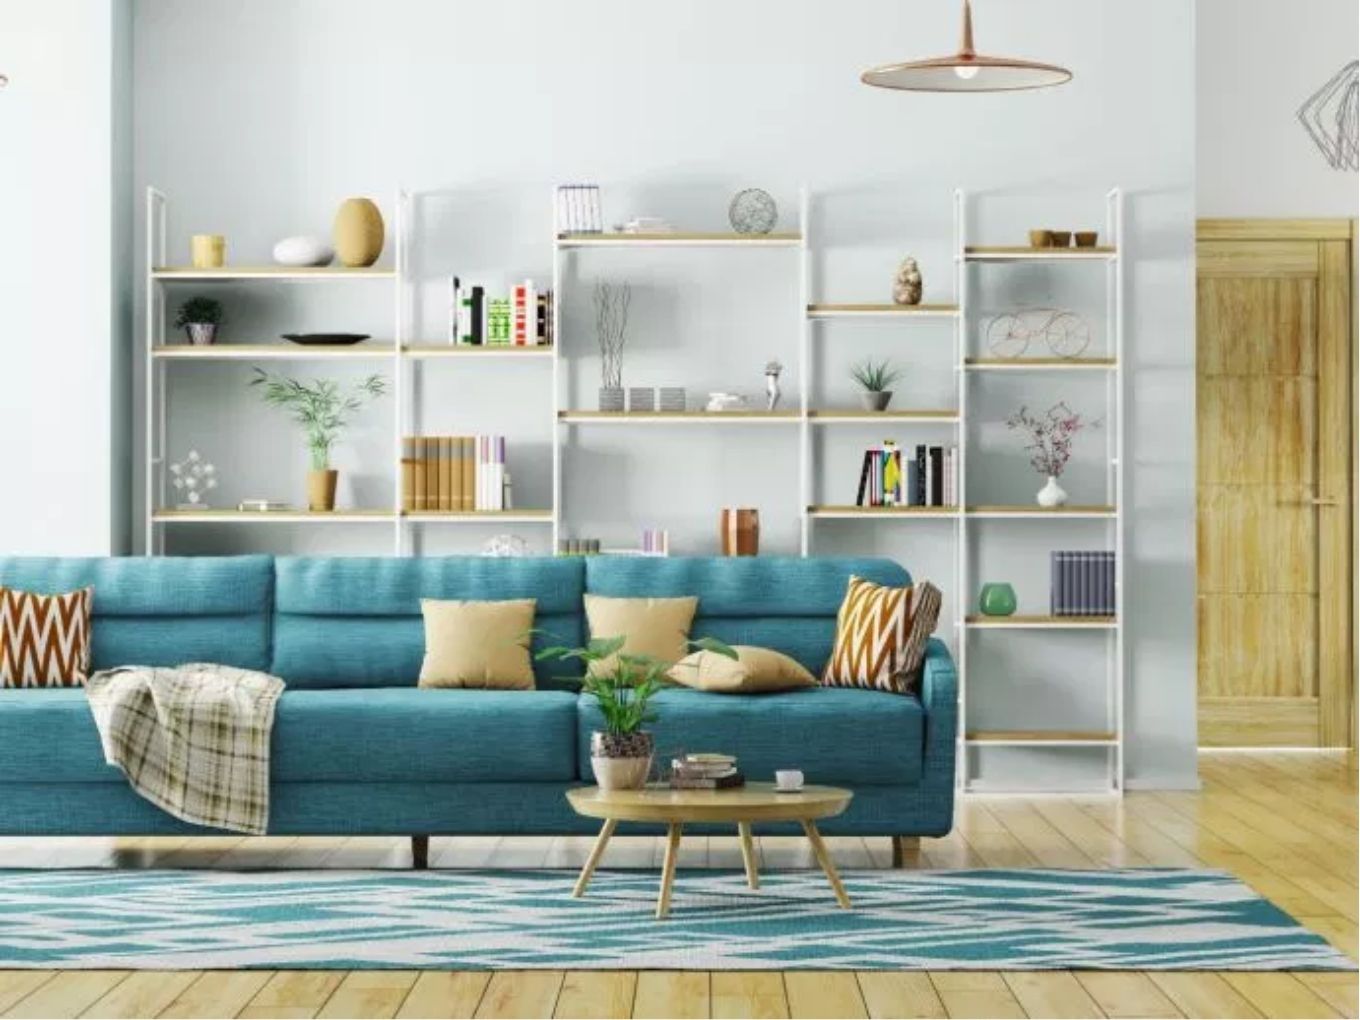 Furniture Rental Startup CasaOne Raises $16 Mn In Series B Led By Accel